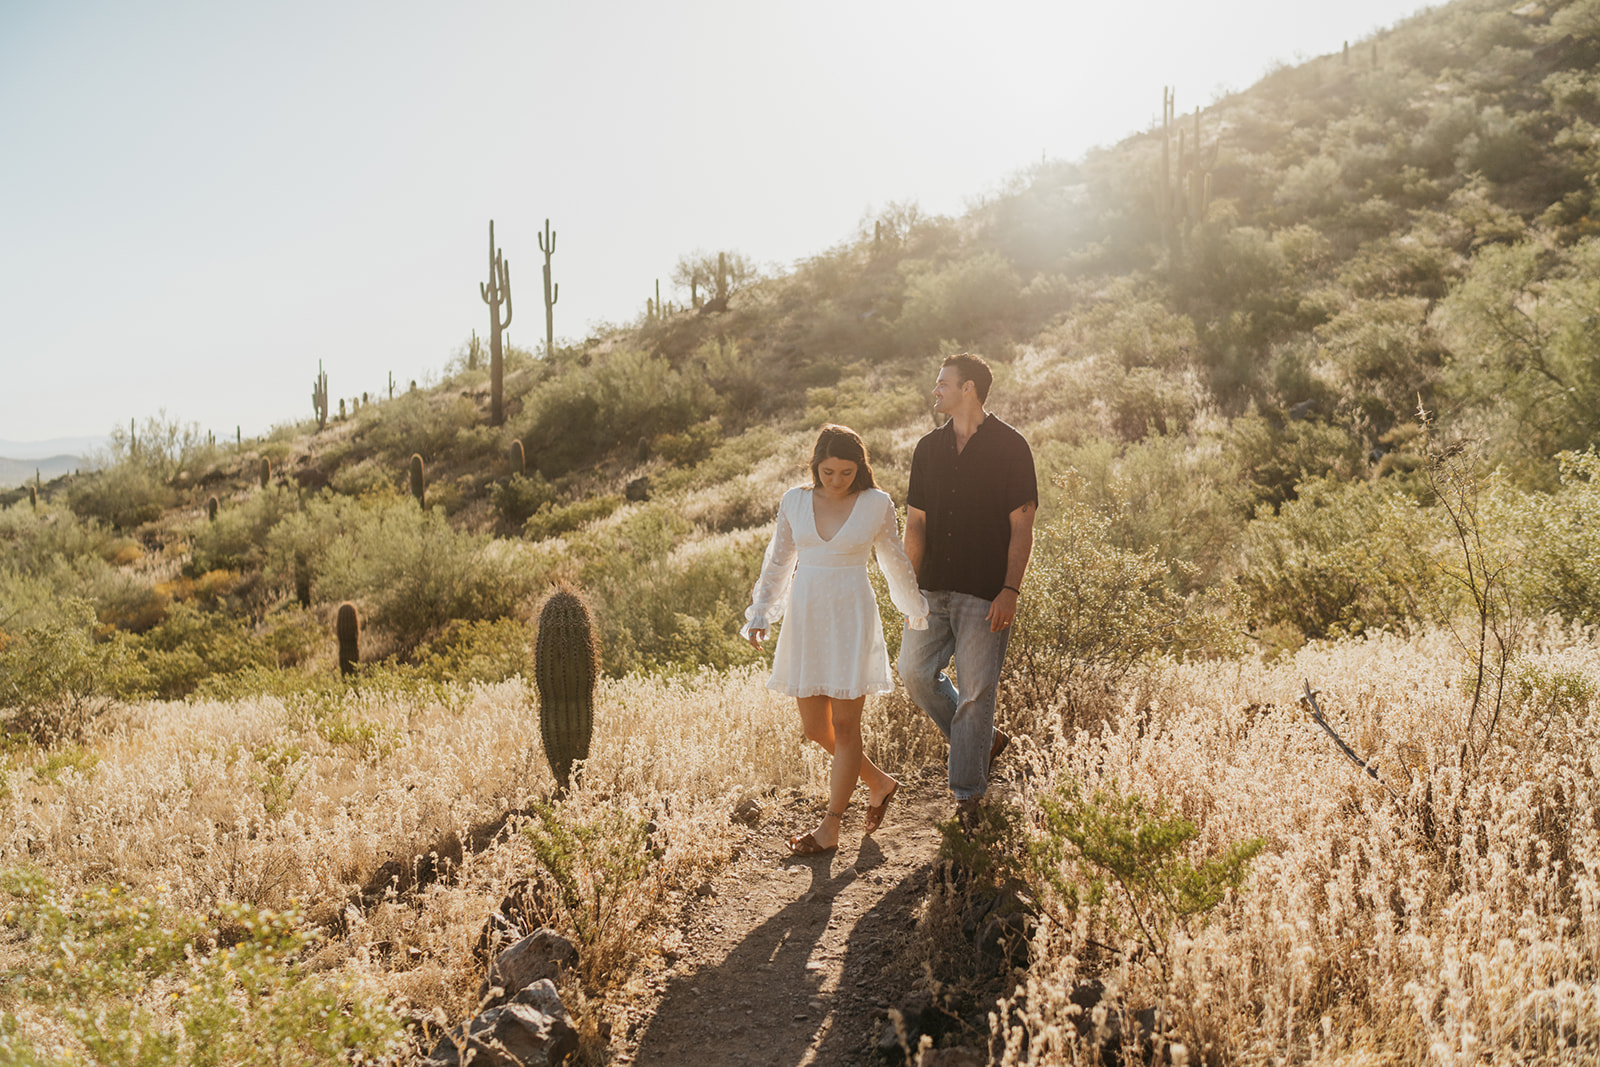 A couple at Picacho Peak State Park celebrating their wedding anniversary